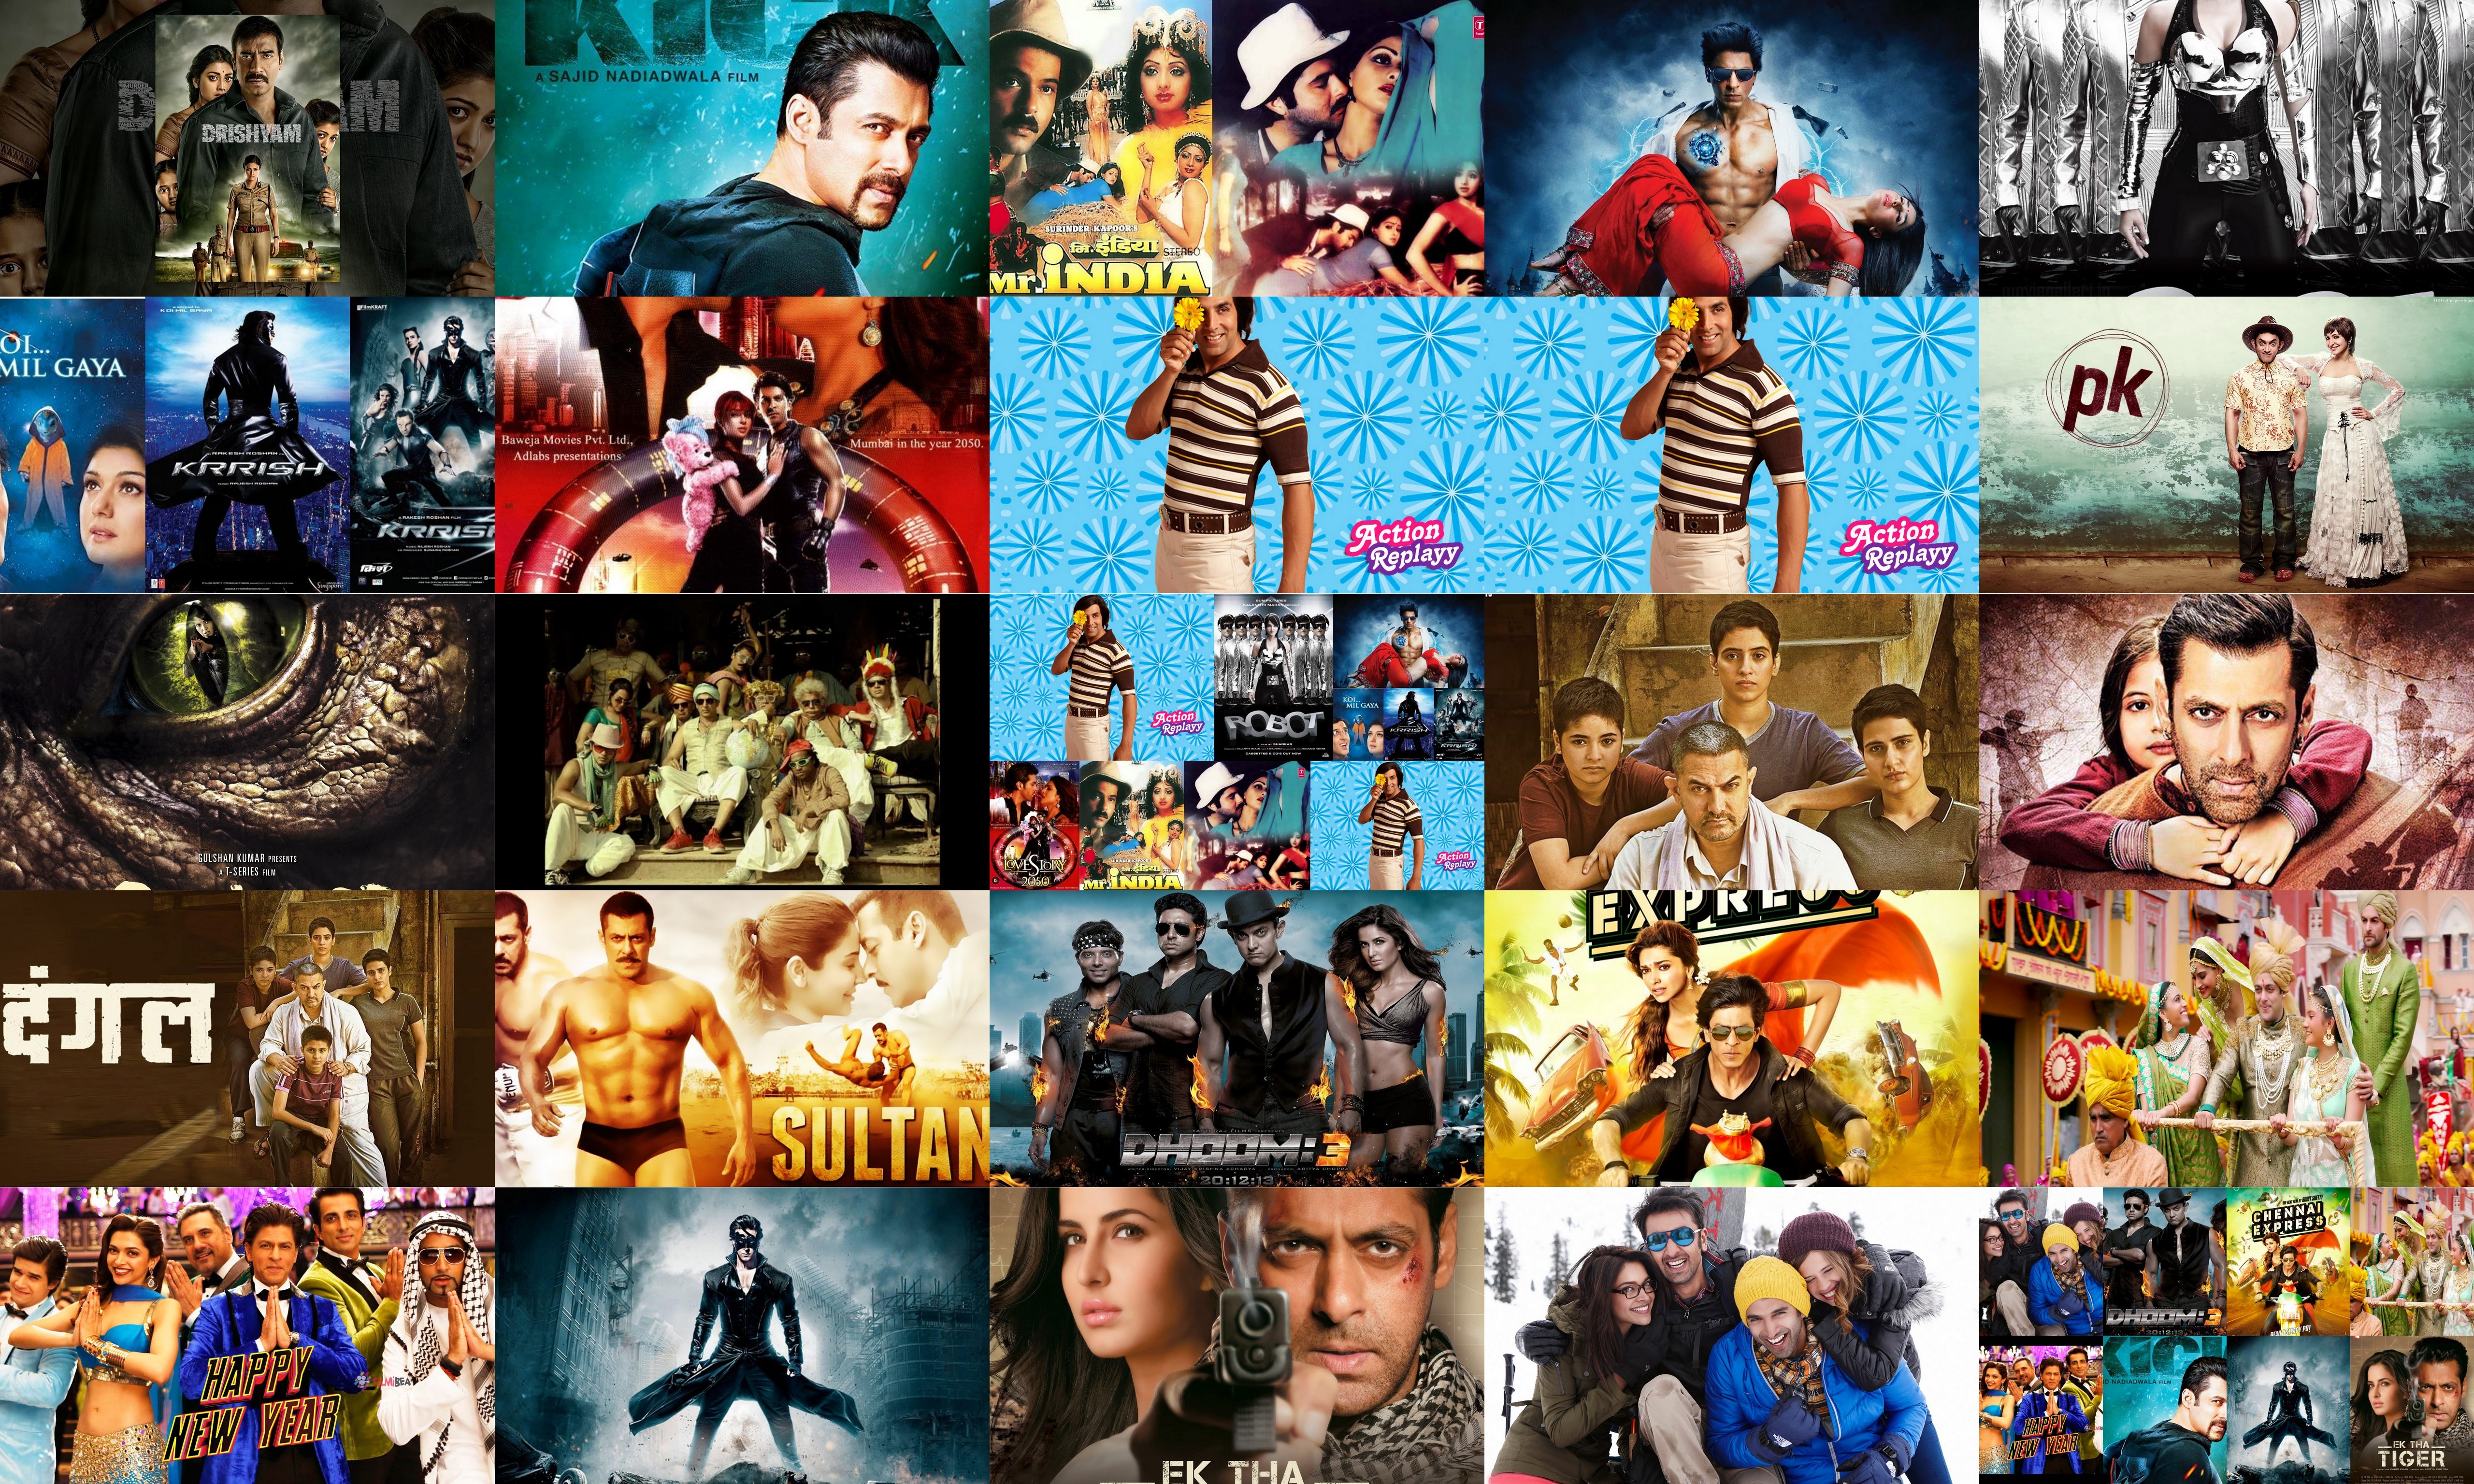 List of top 10 Bollywood films remade from South Indian films The